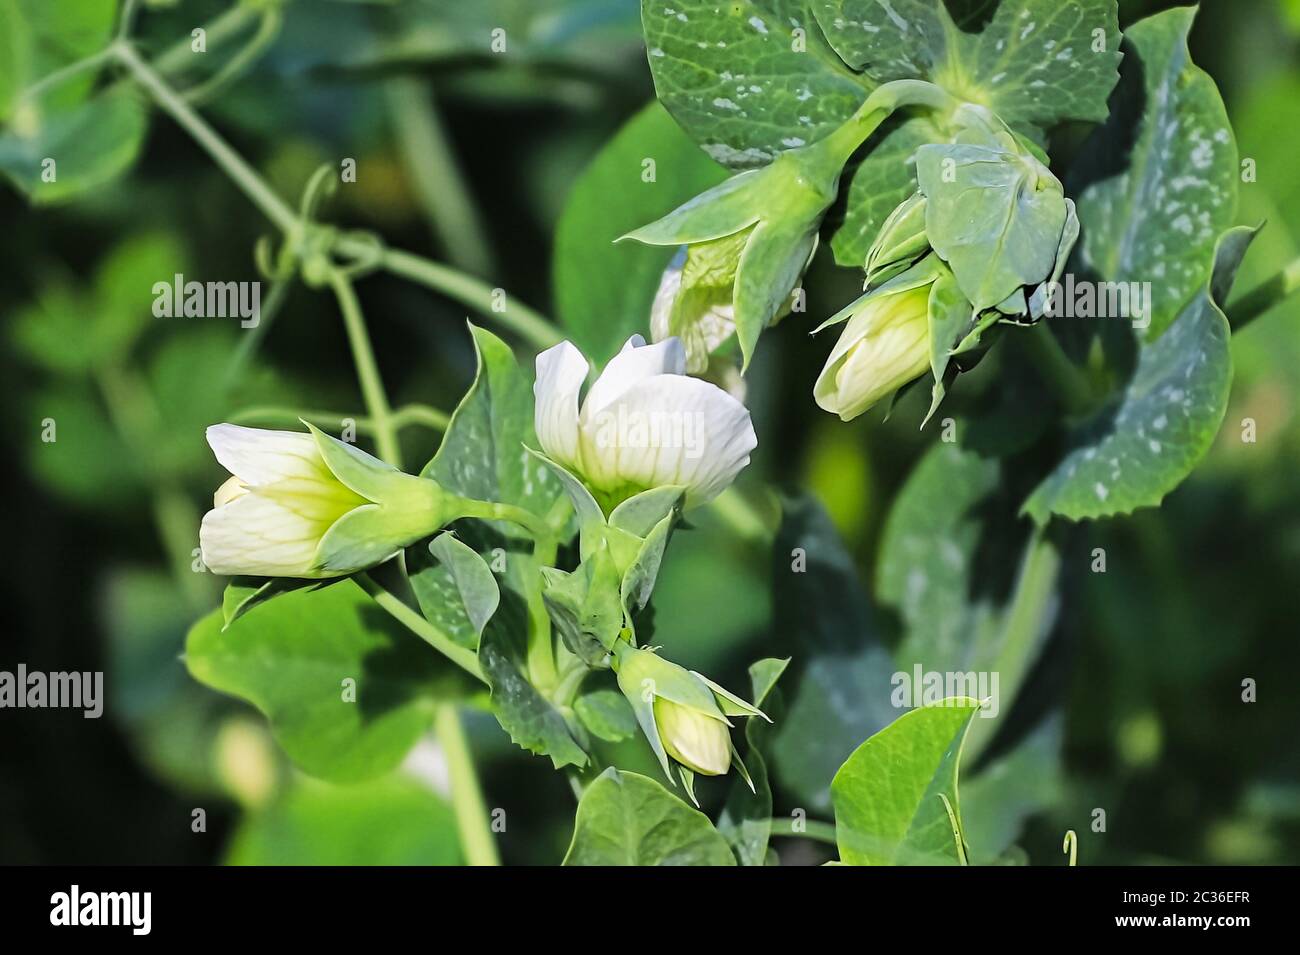 Detailed view of pea flowers growing on a plant. Stock Photo